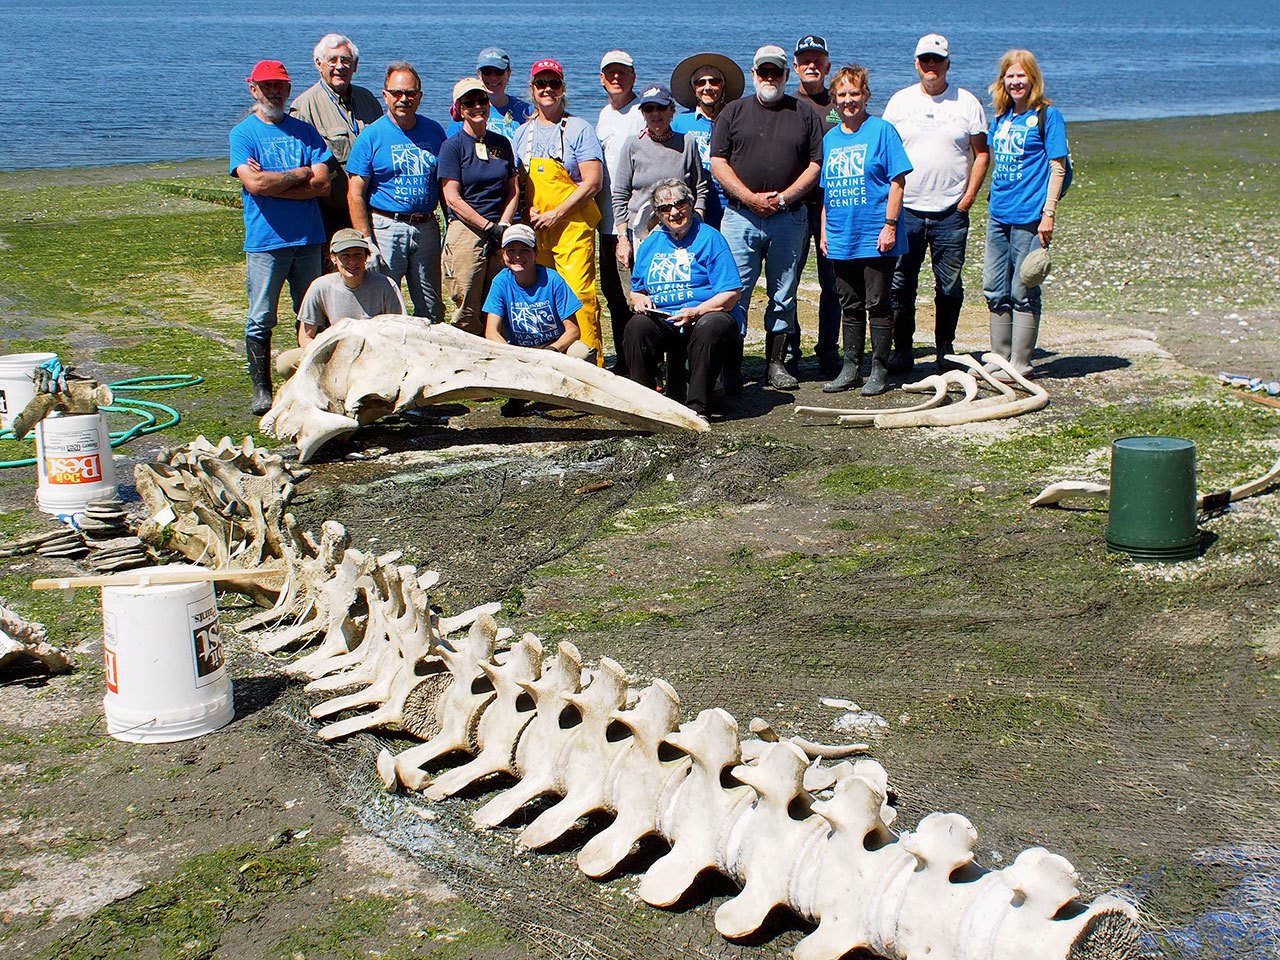 The bones of a deceased gray whale will be used for educational purposes at the Port Townsend Marine Science Center. (Wendy Feltham/Port Townsend Marine Science Center)